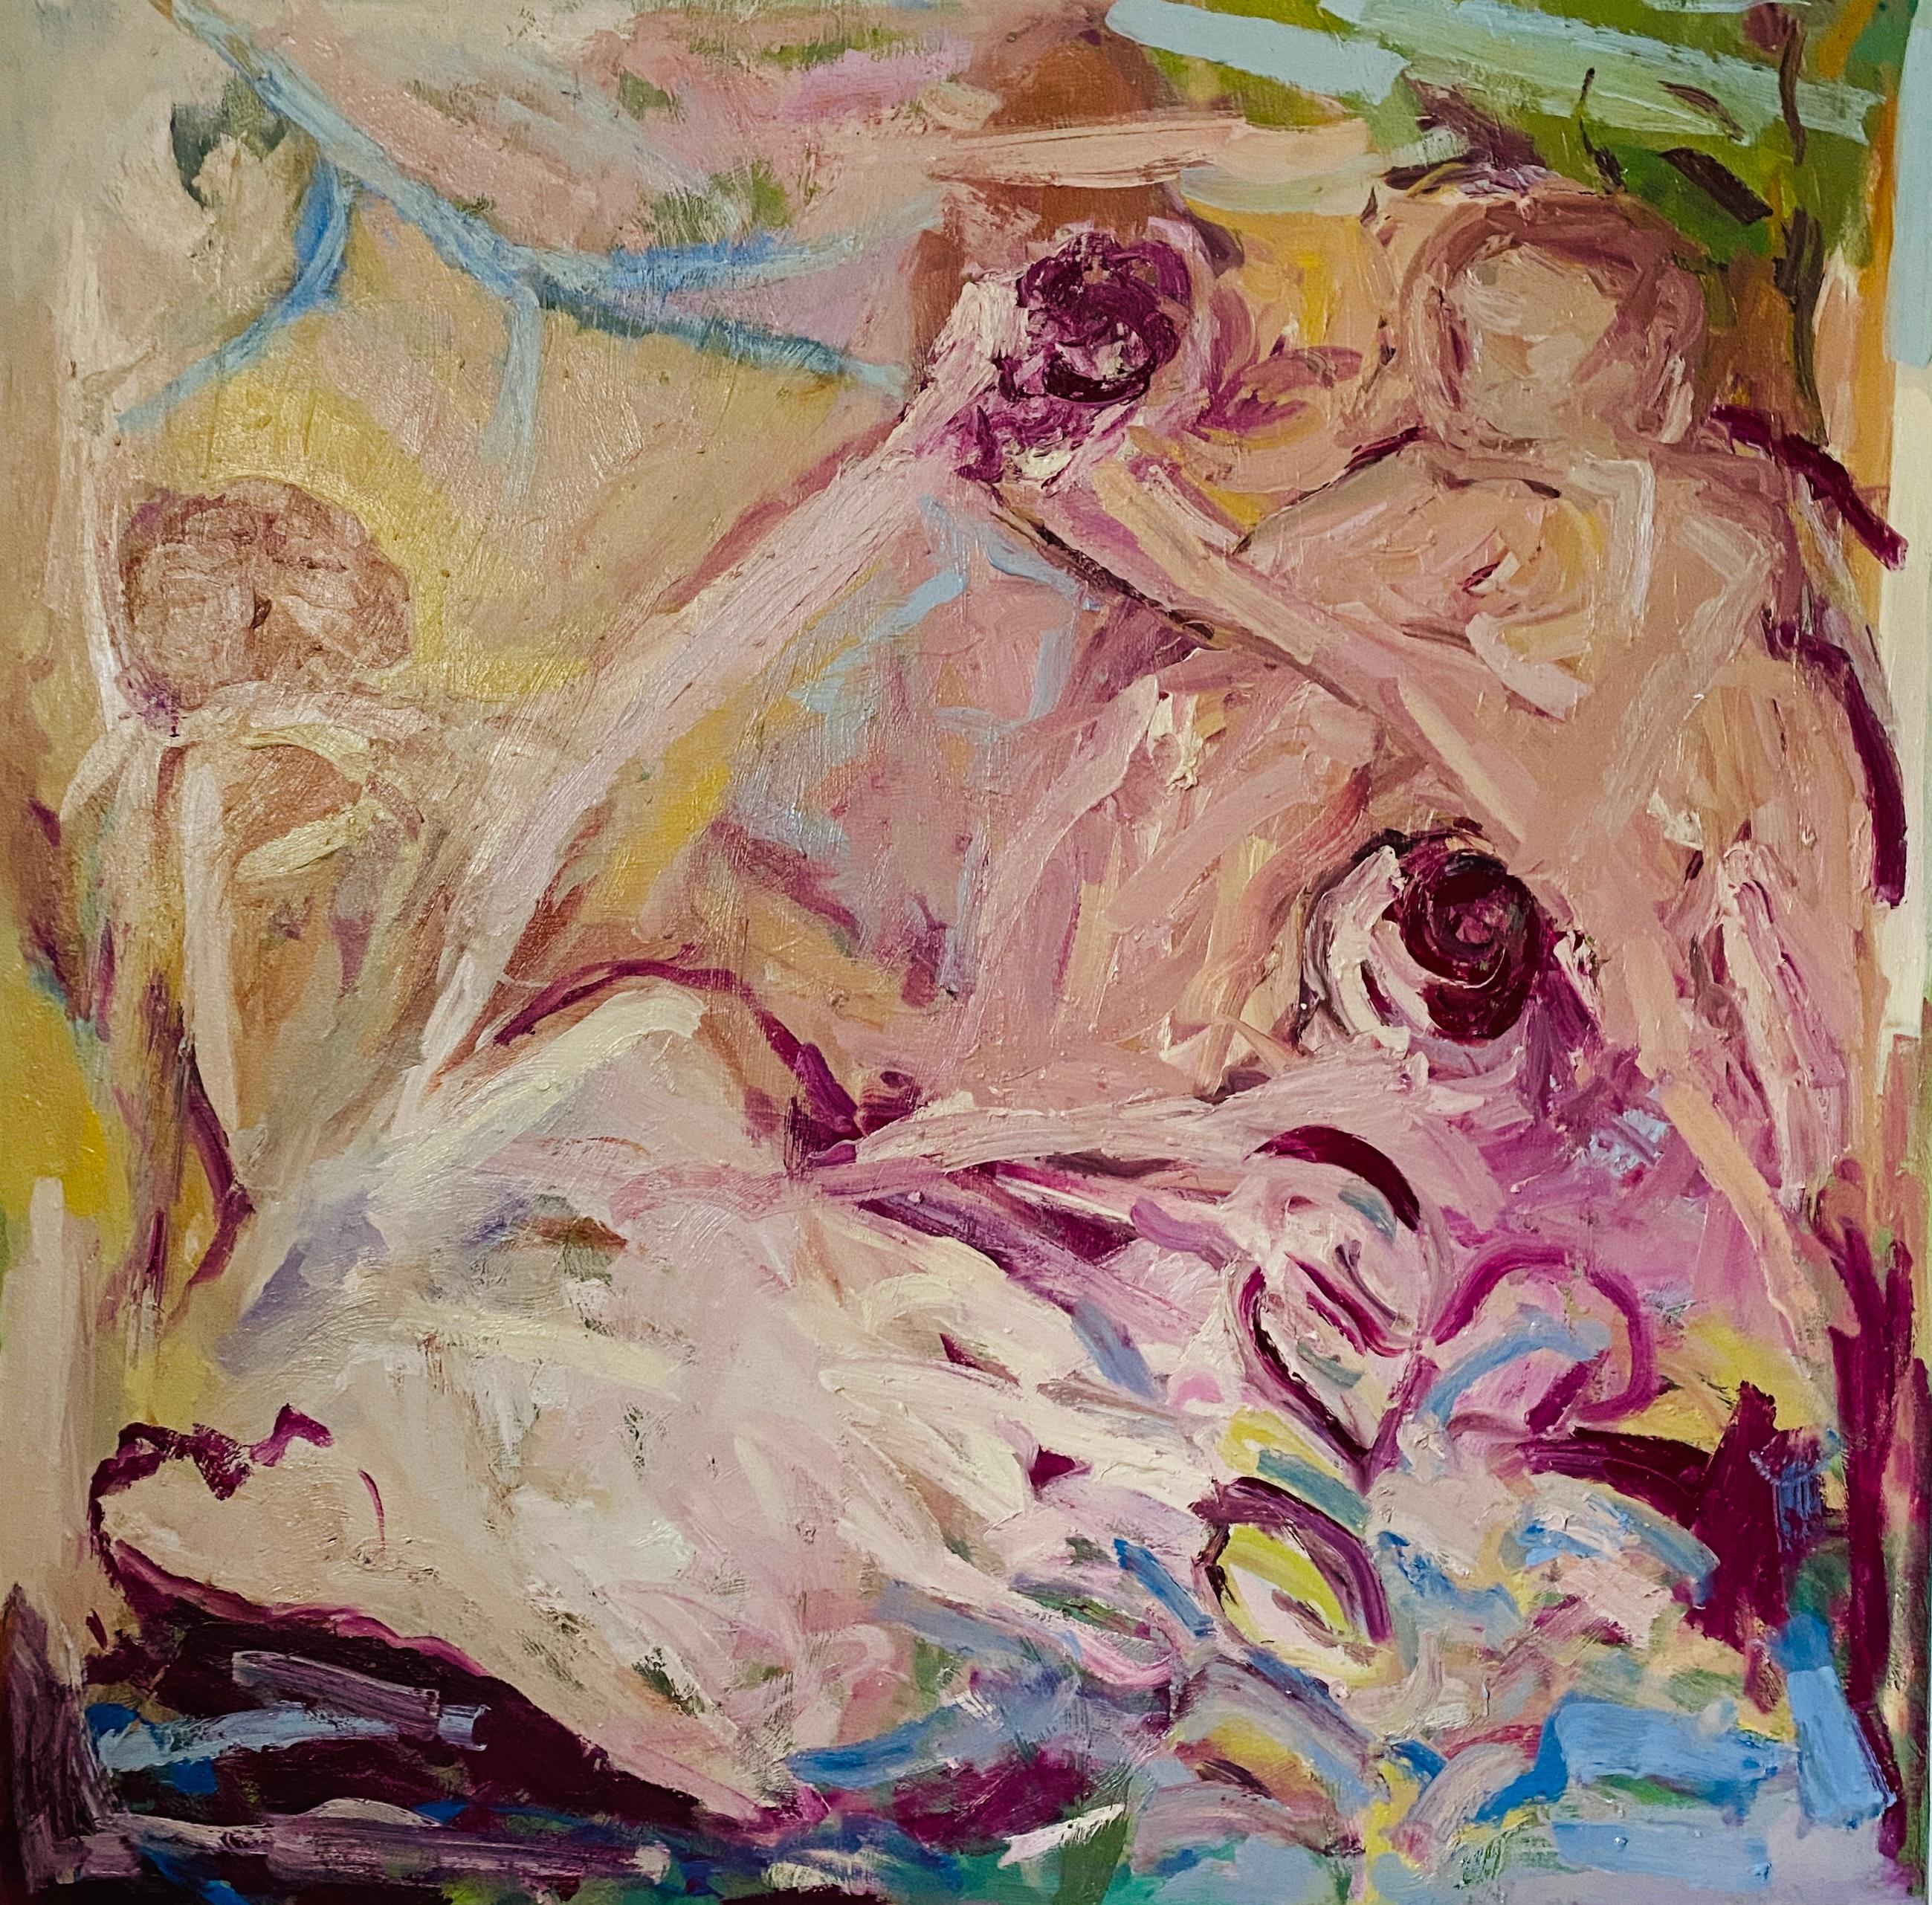 FRANCESCA OWEN  Figurative Painting - Venus In The Sunlight. Large Contemporary Expressionist Oil Painting